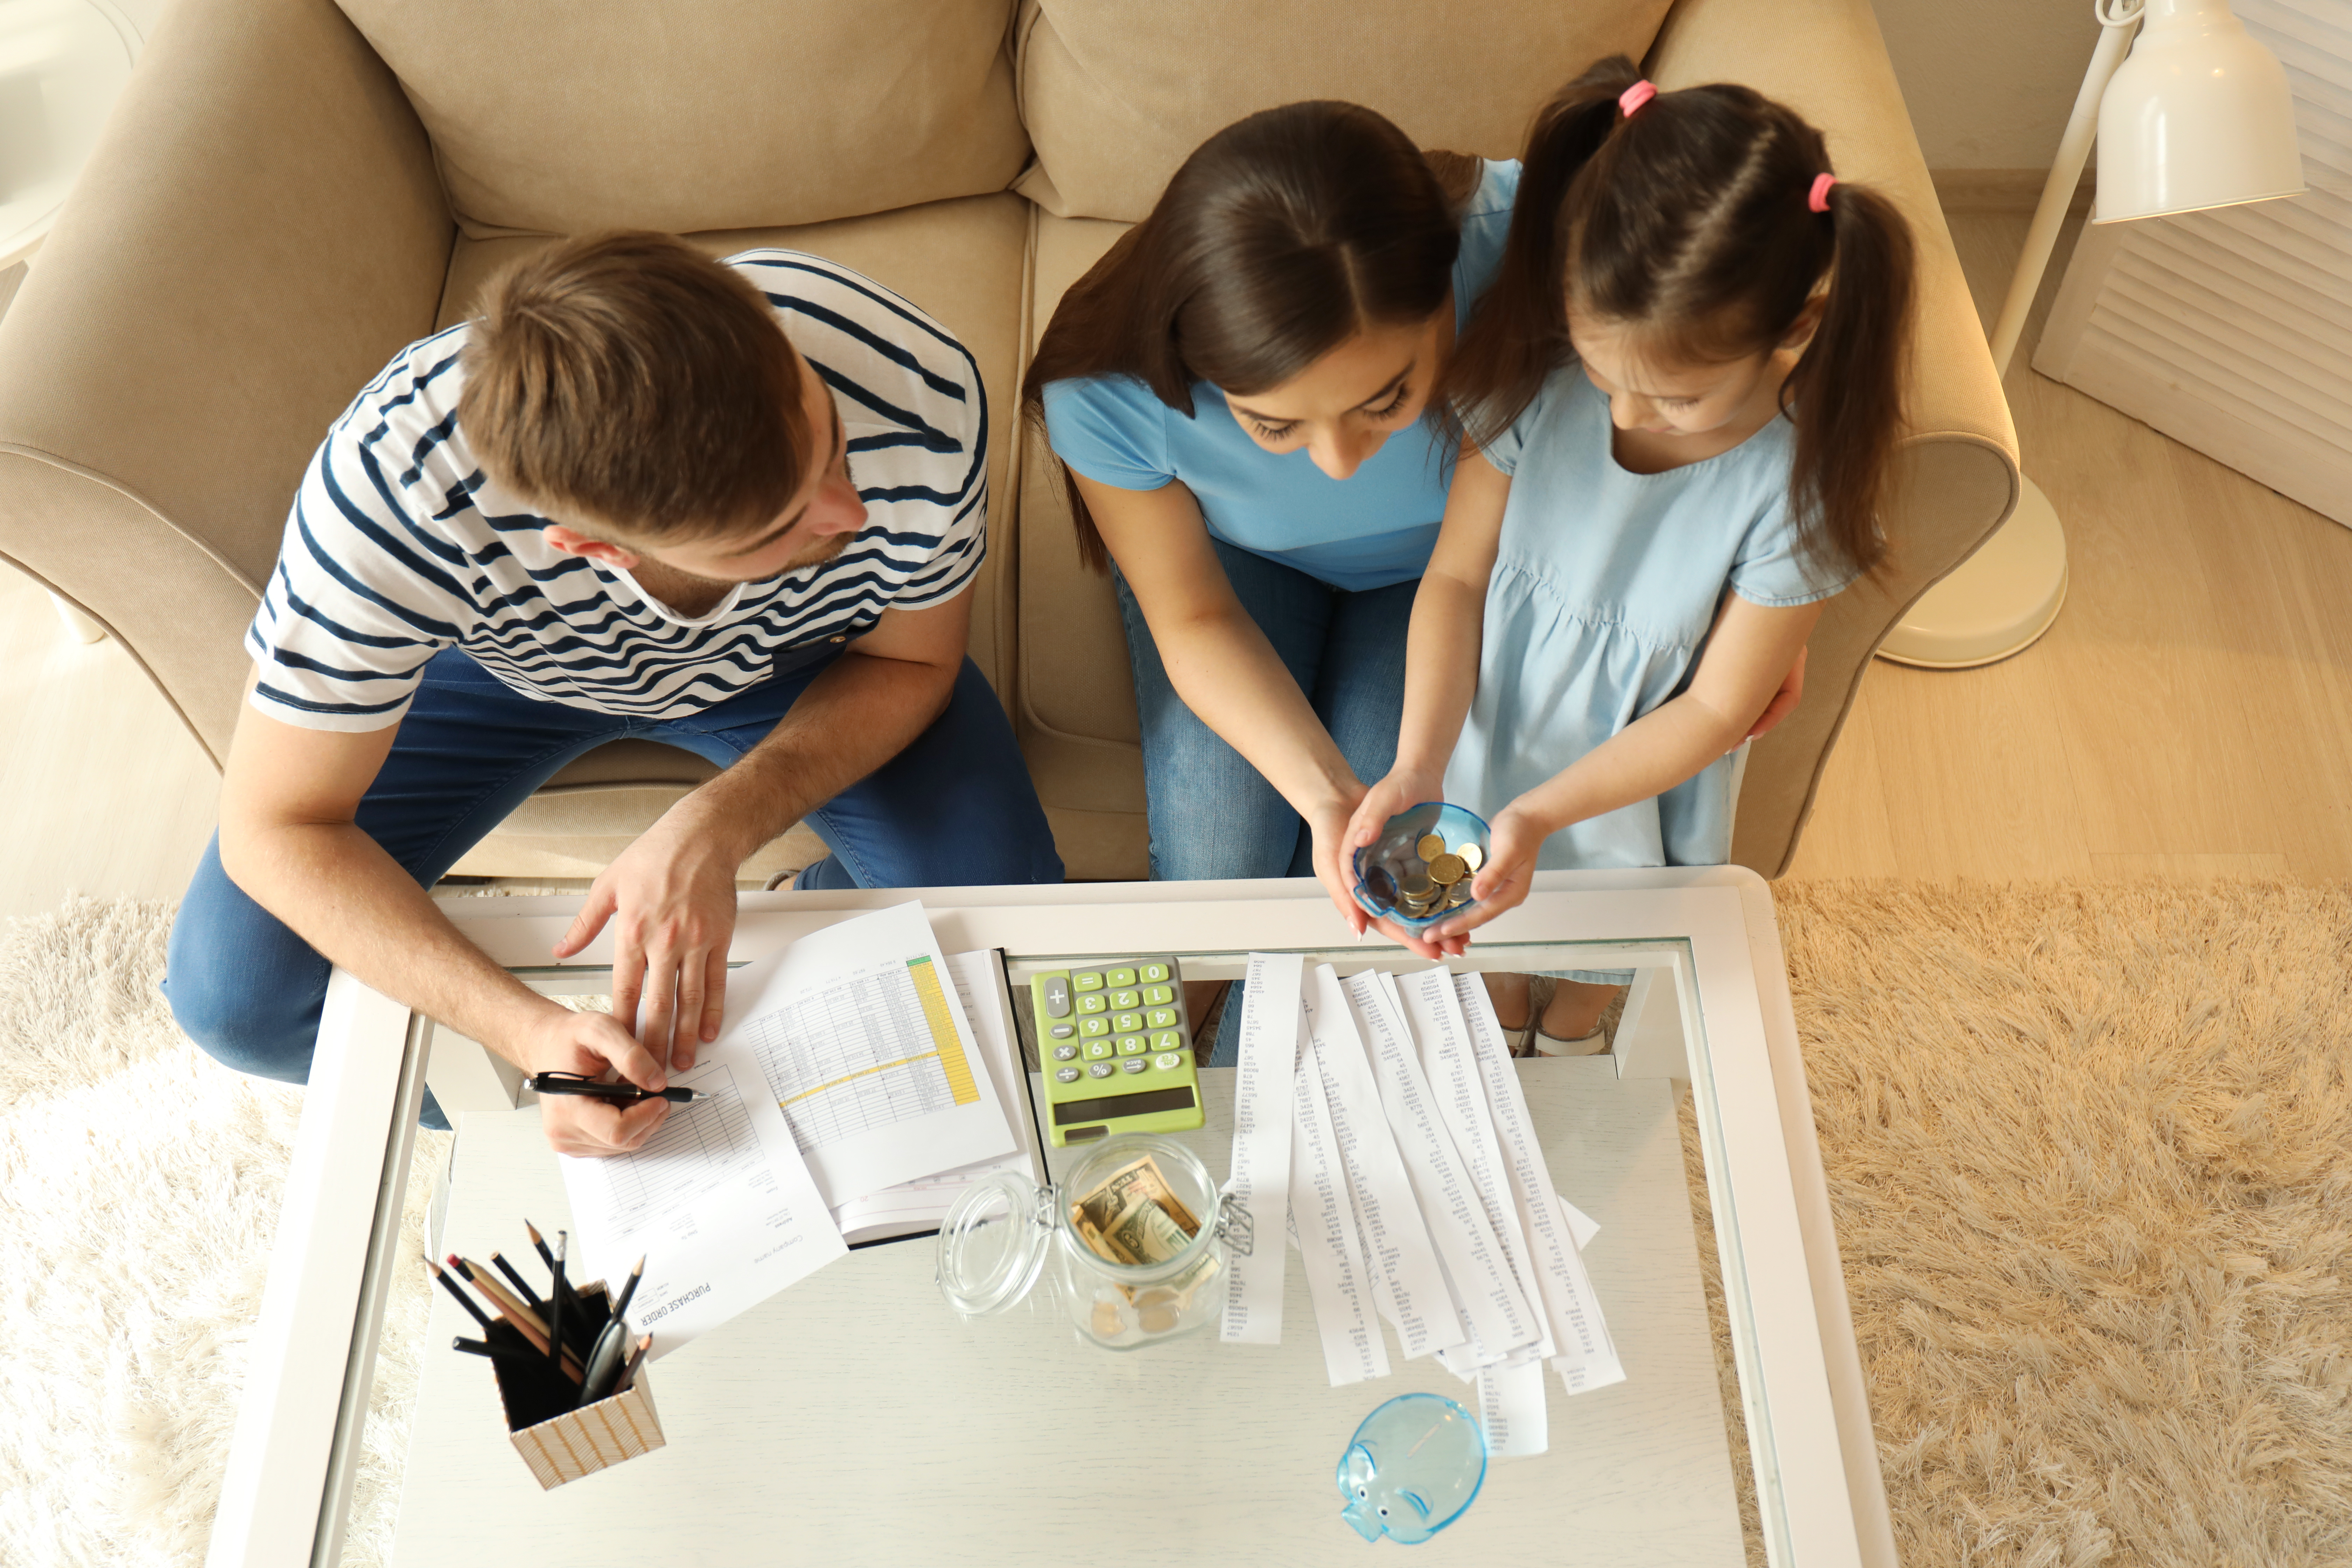 Family paying bills together, using a calculator and counting money in living room.